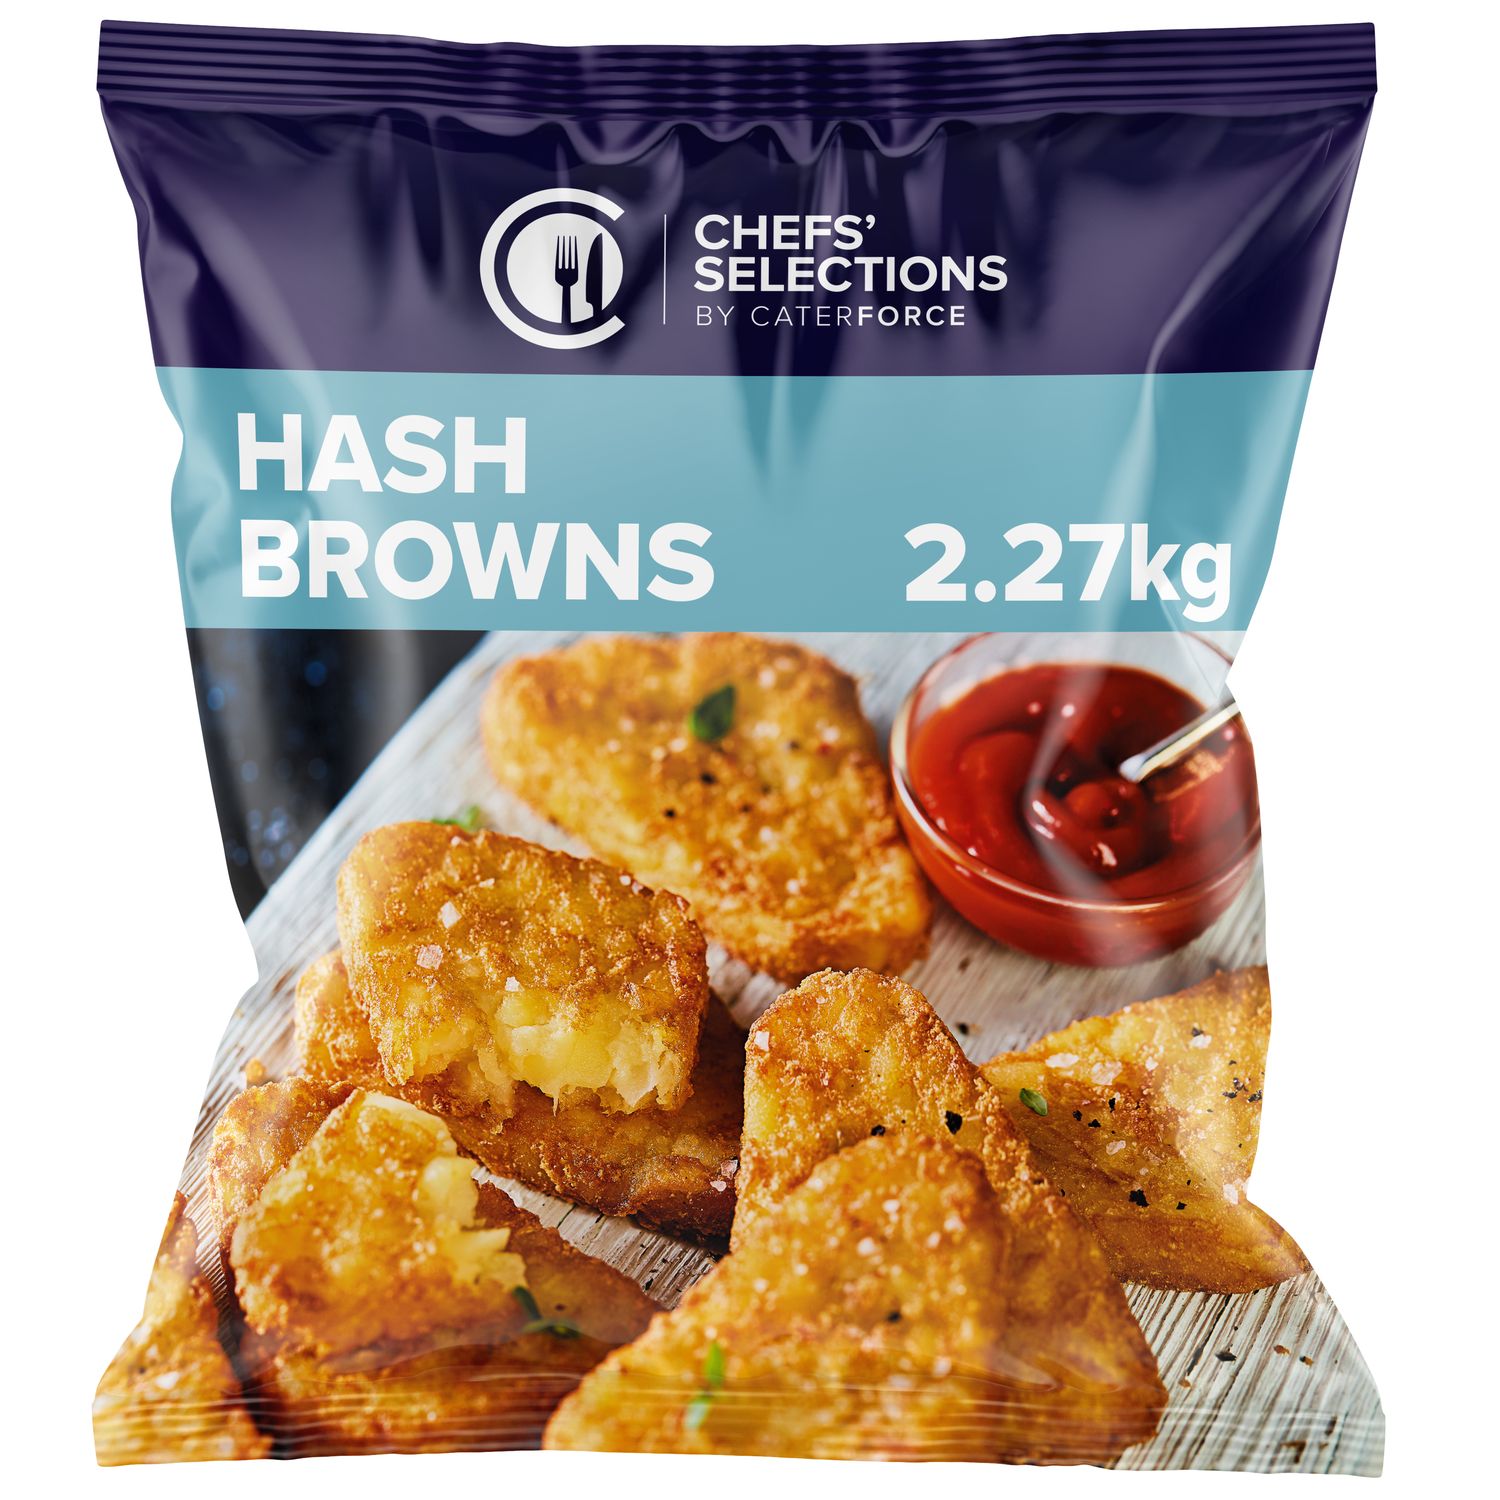 Chefs’ Selections Hash Browns (4 x 2.27kg)